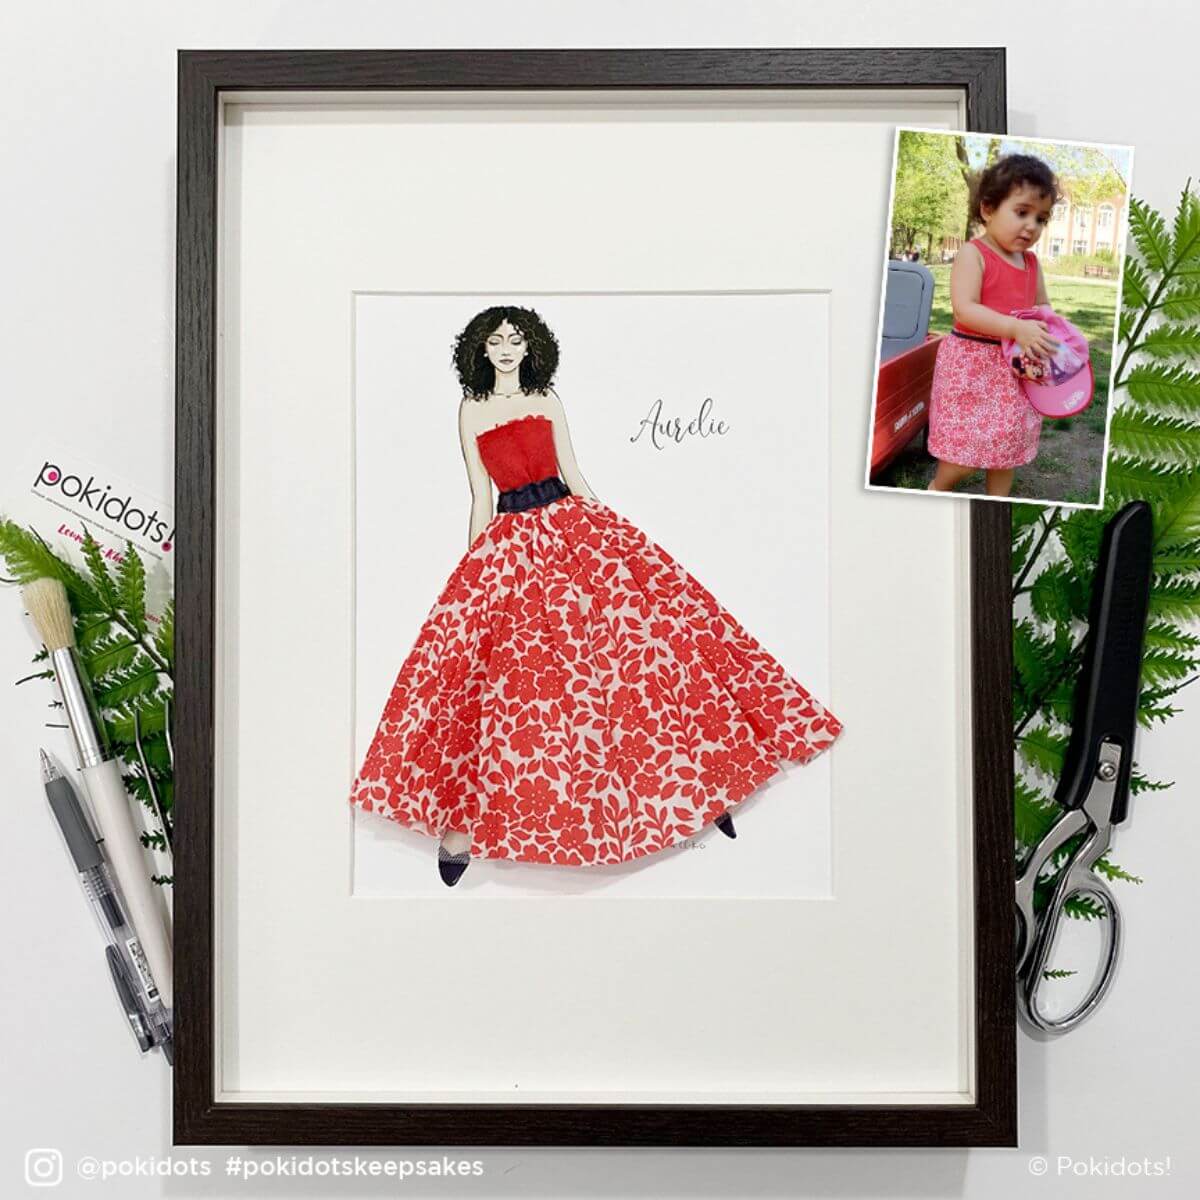 An example of a keepsake illustration & artwork crafted from a sentimental dress worn by a young girl/toddler created by Louma for a client.